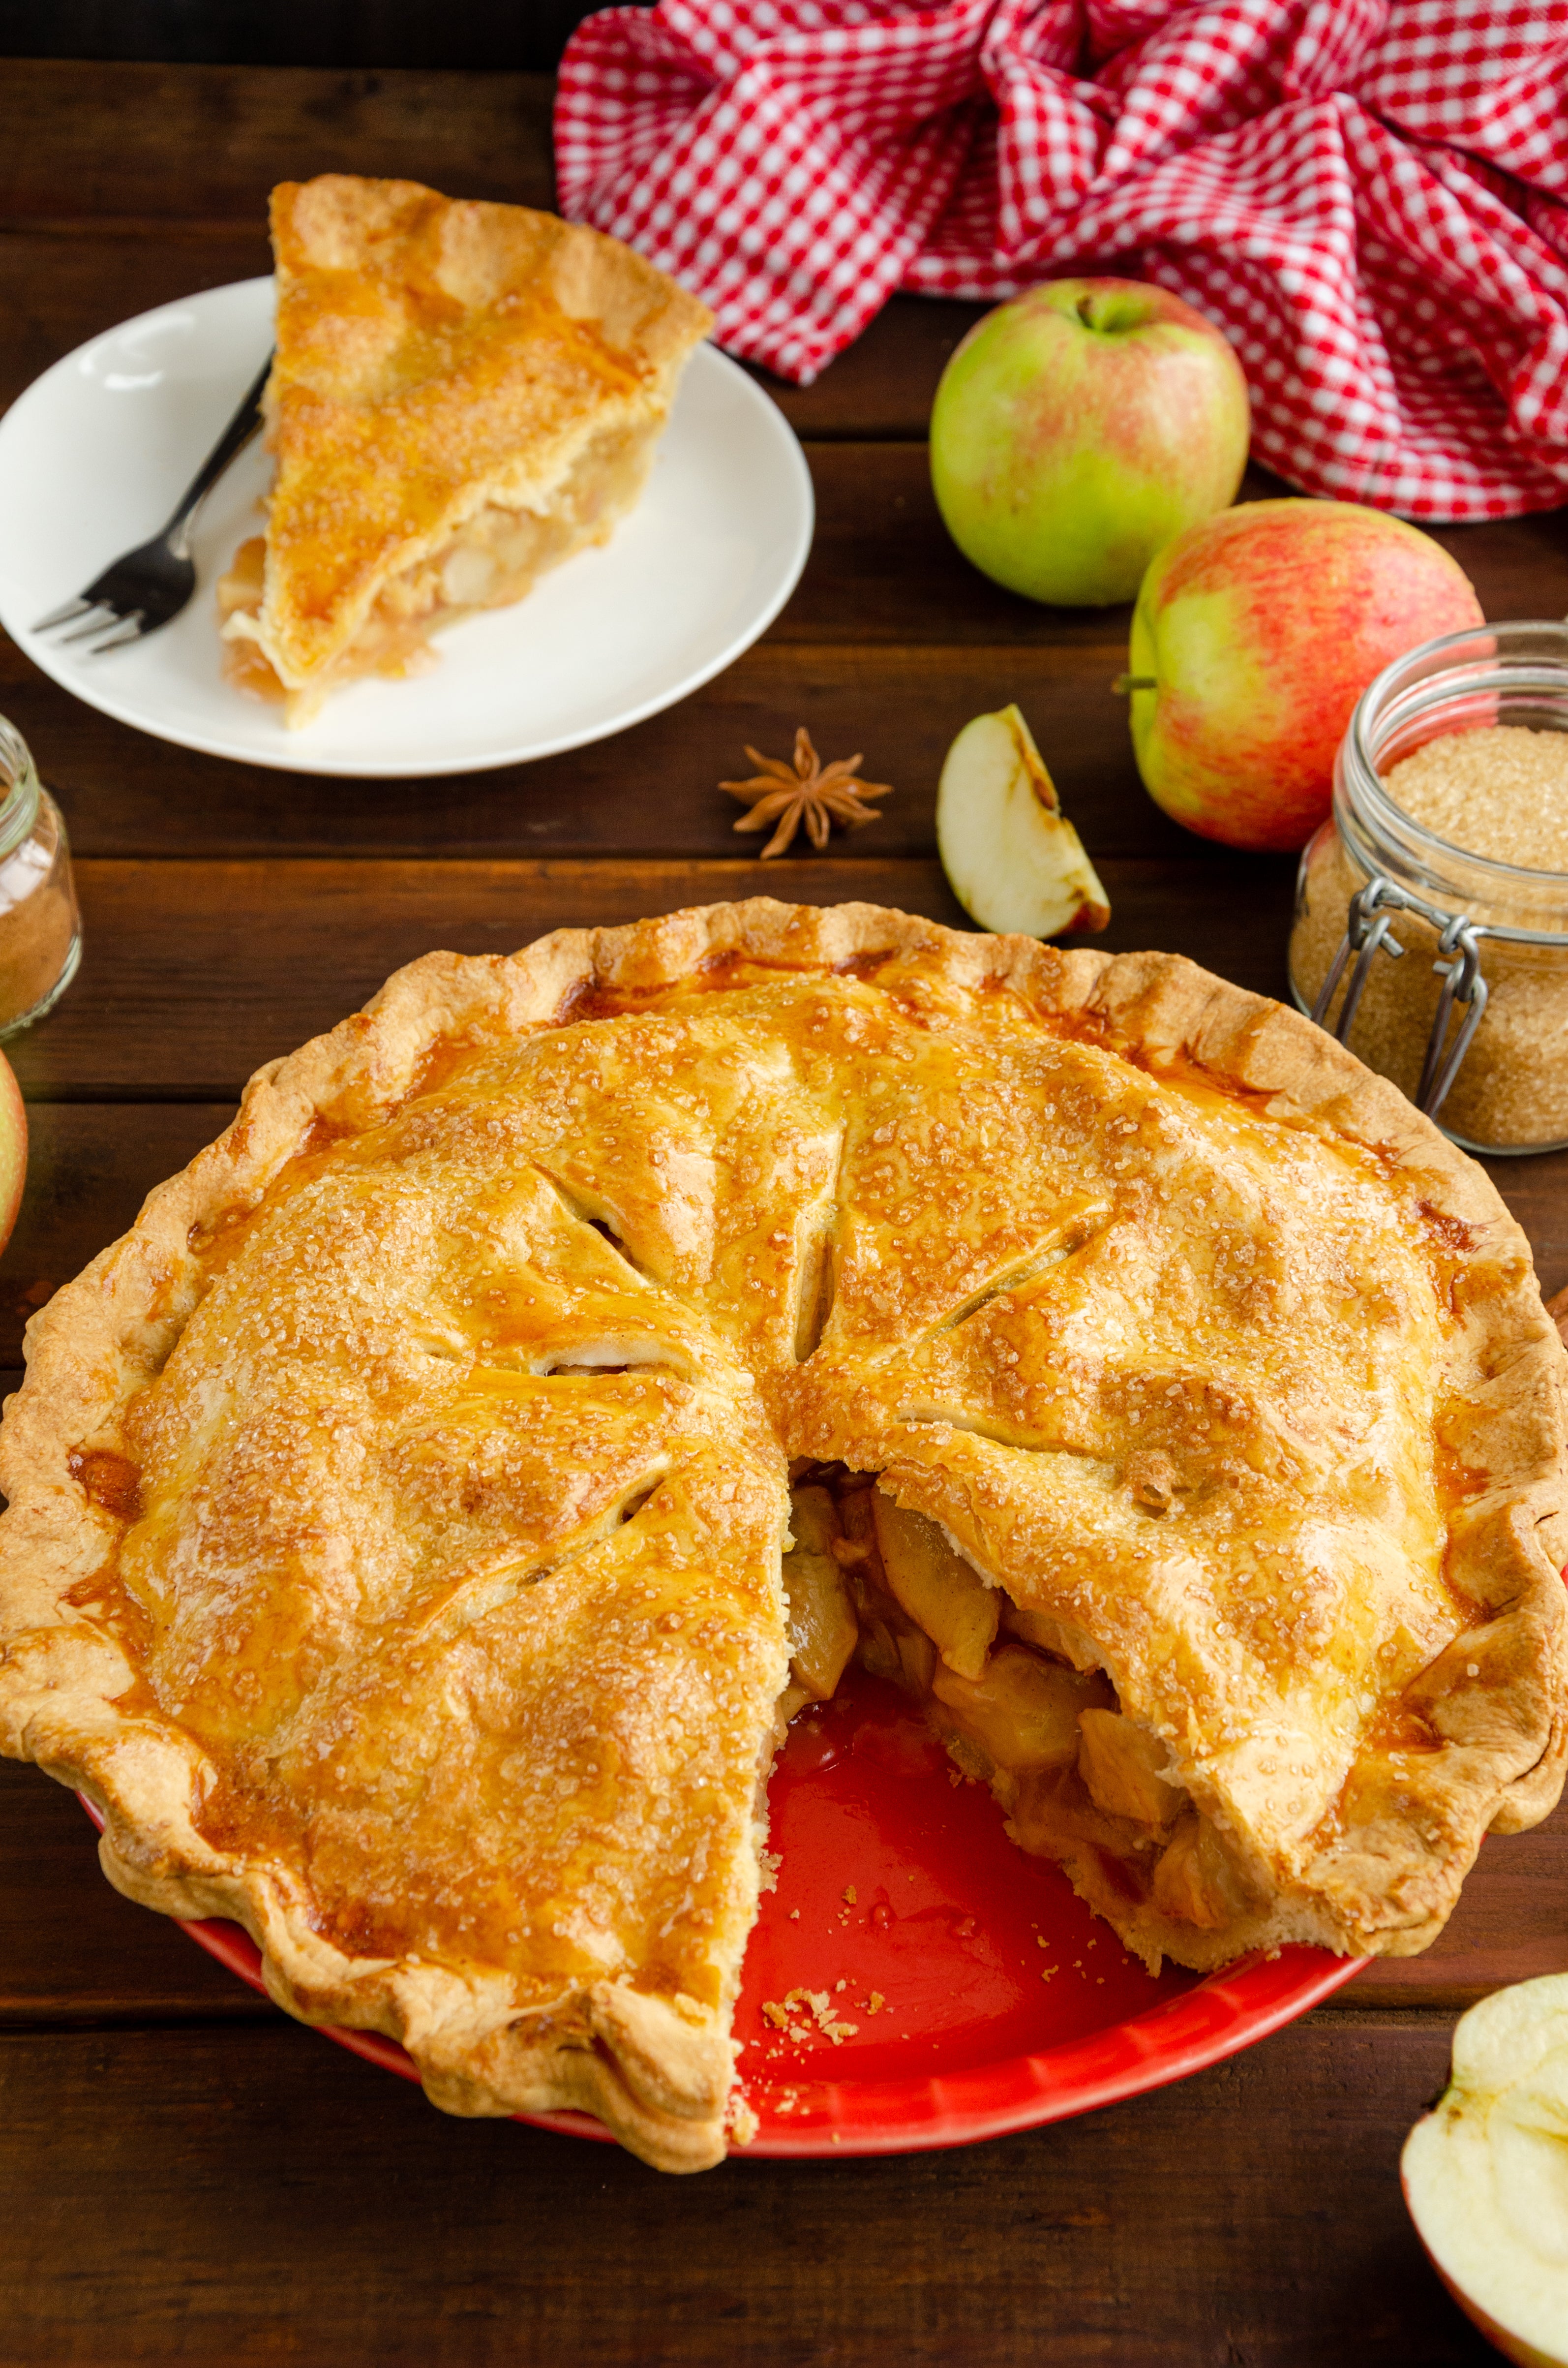 Using a variety of apples in this pie gives it far more flavour